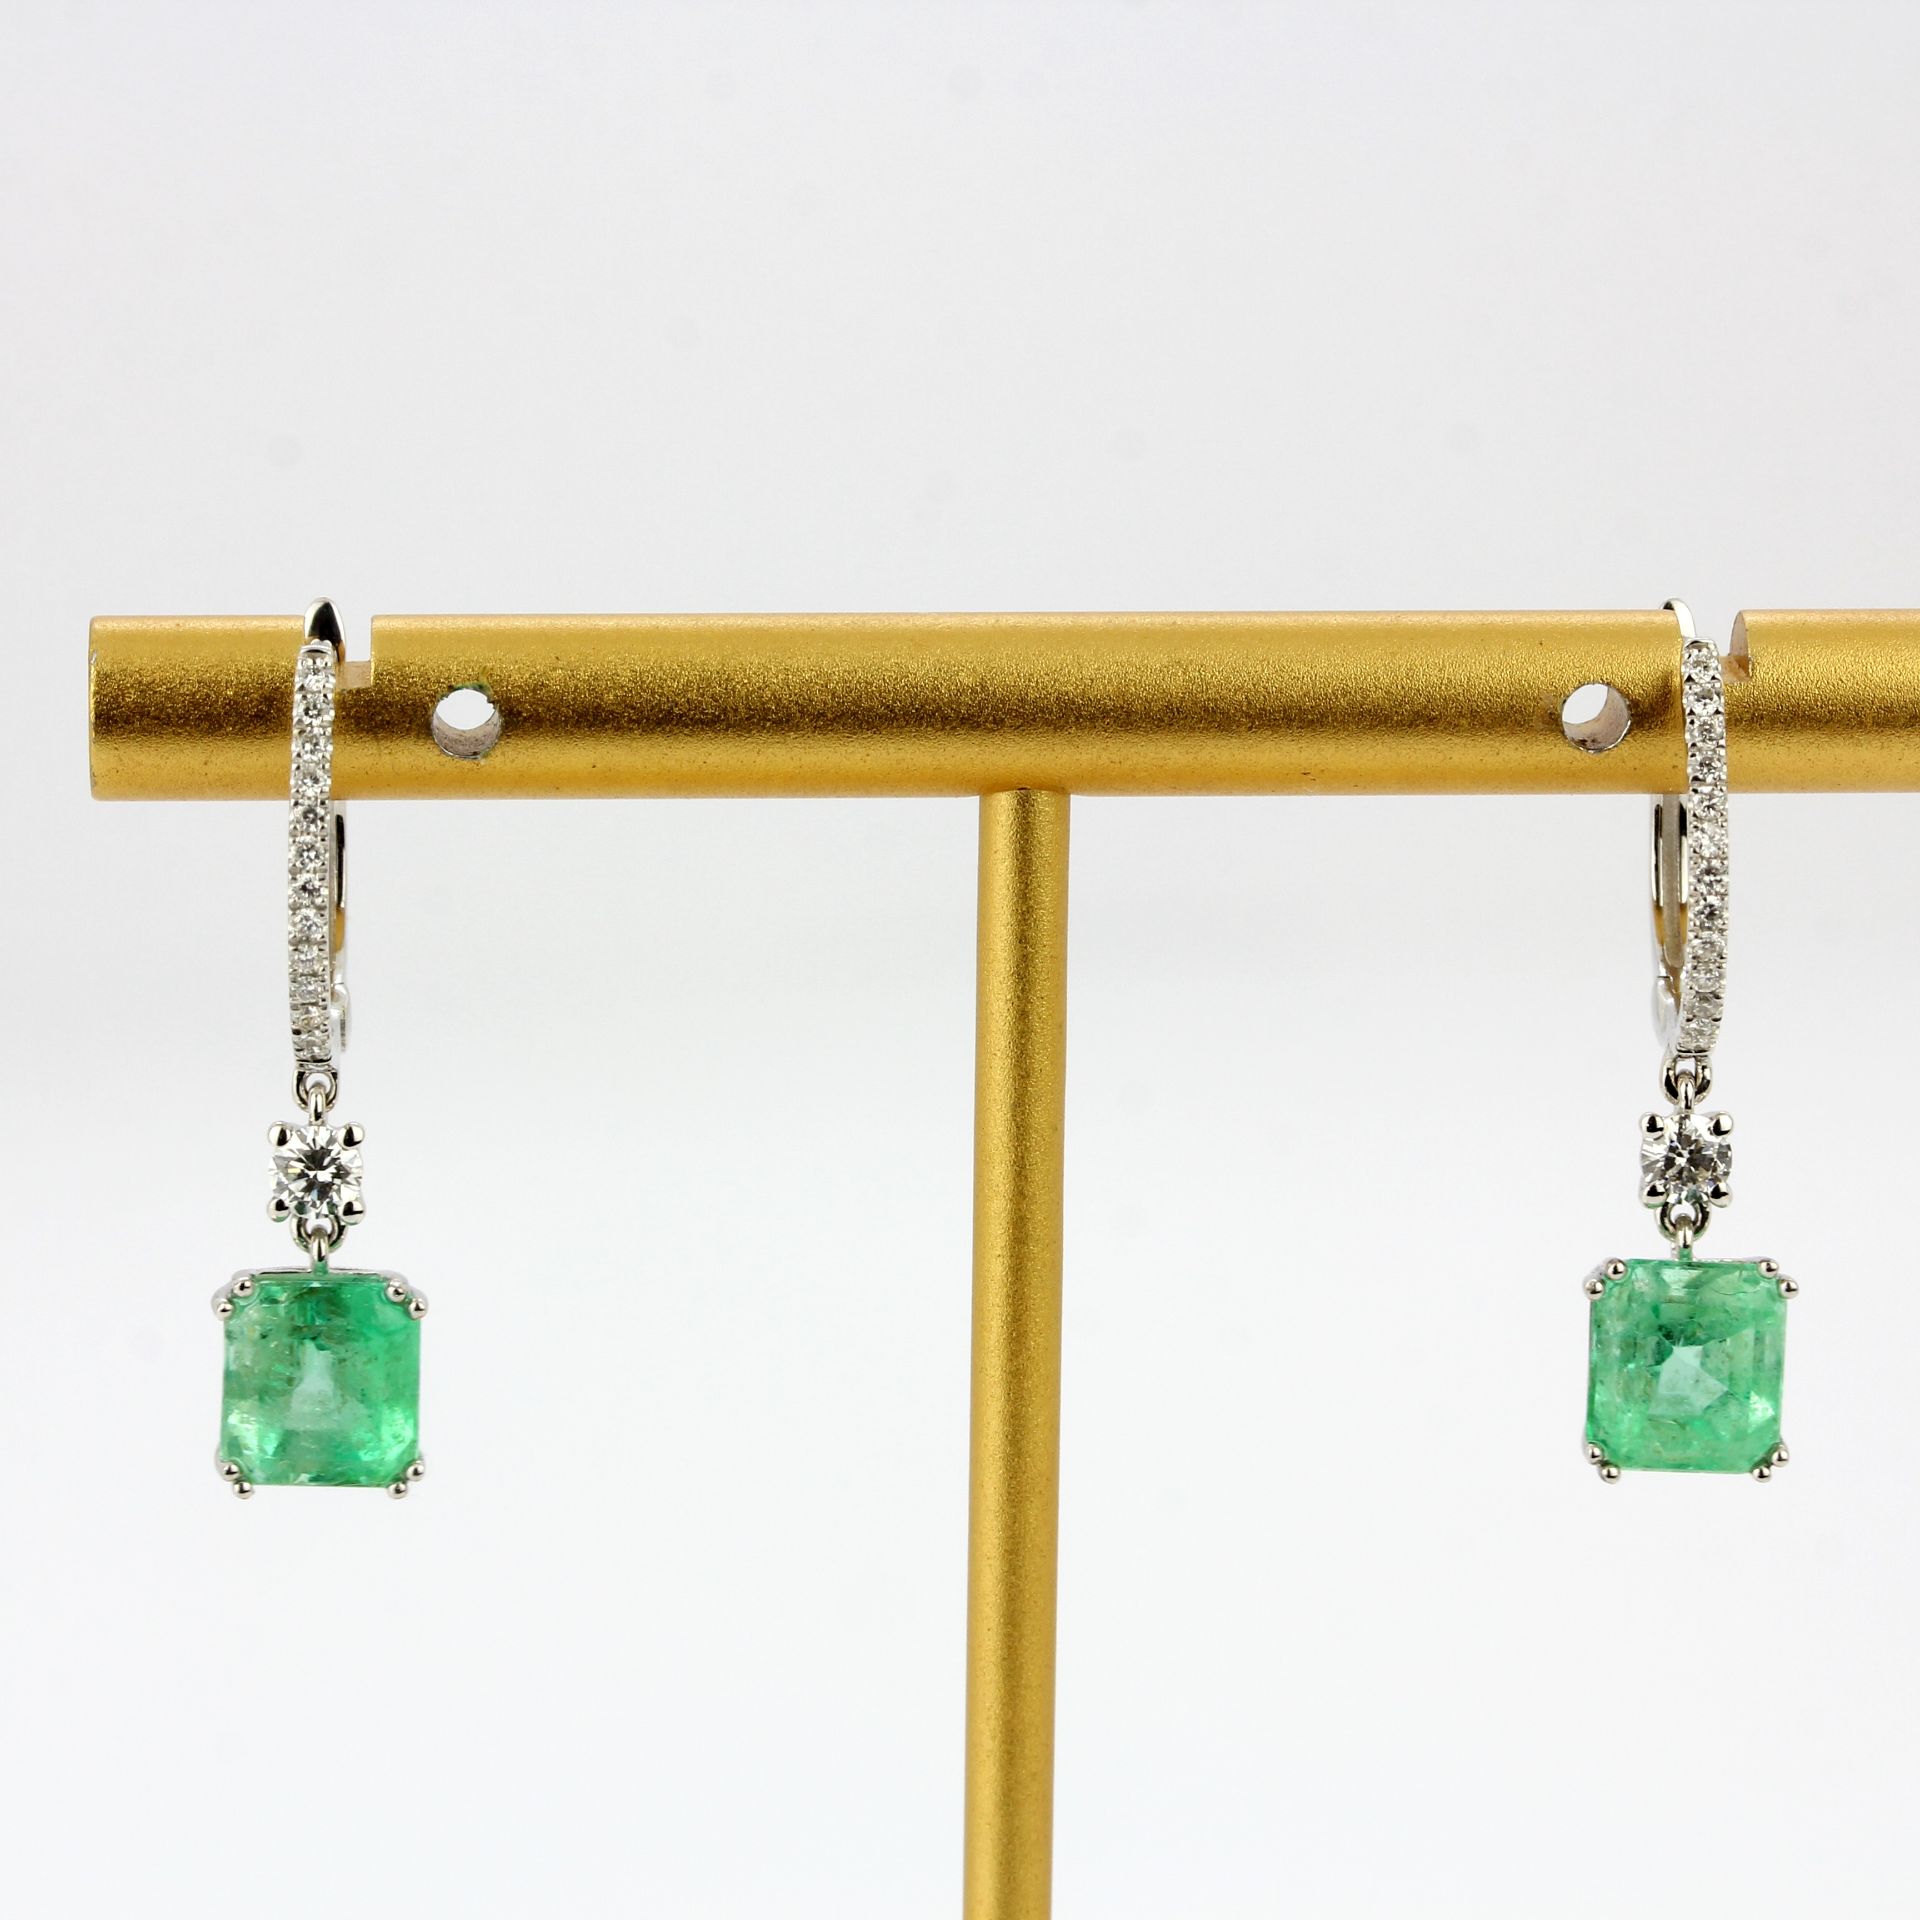 A pair of 18ct white gold drop earrings set with emerald cut emeralds and diamonds, L. 2.7cm.